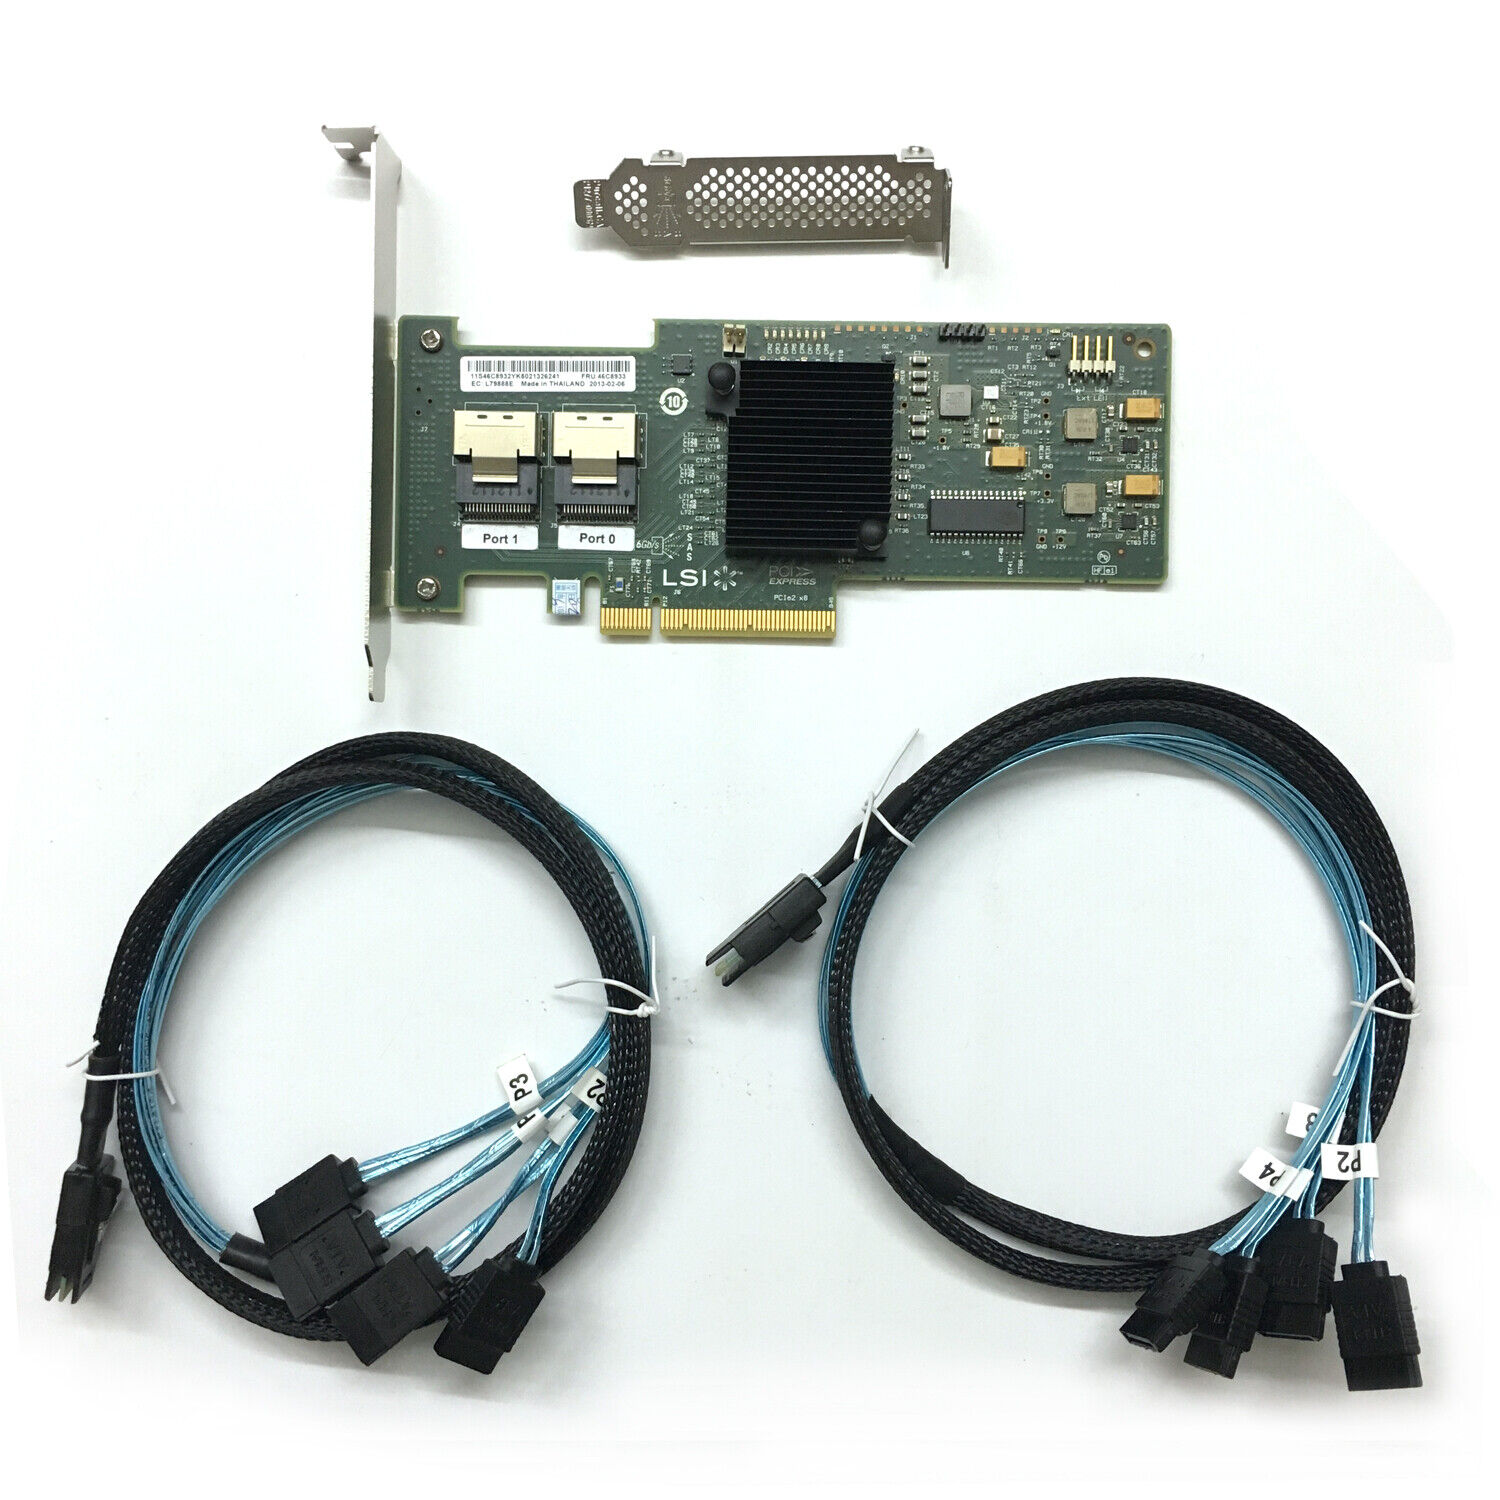 LSI SAS9200-8i IBM 46C8937 9200-8i IT Mode Raid + SAS SFF-8087 to 4x SATA Cable